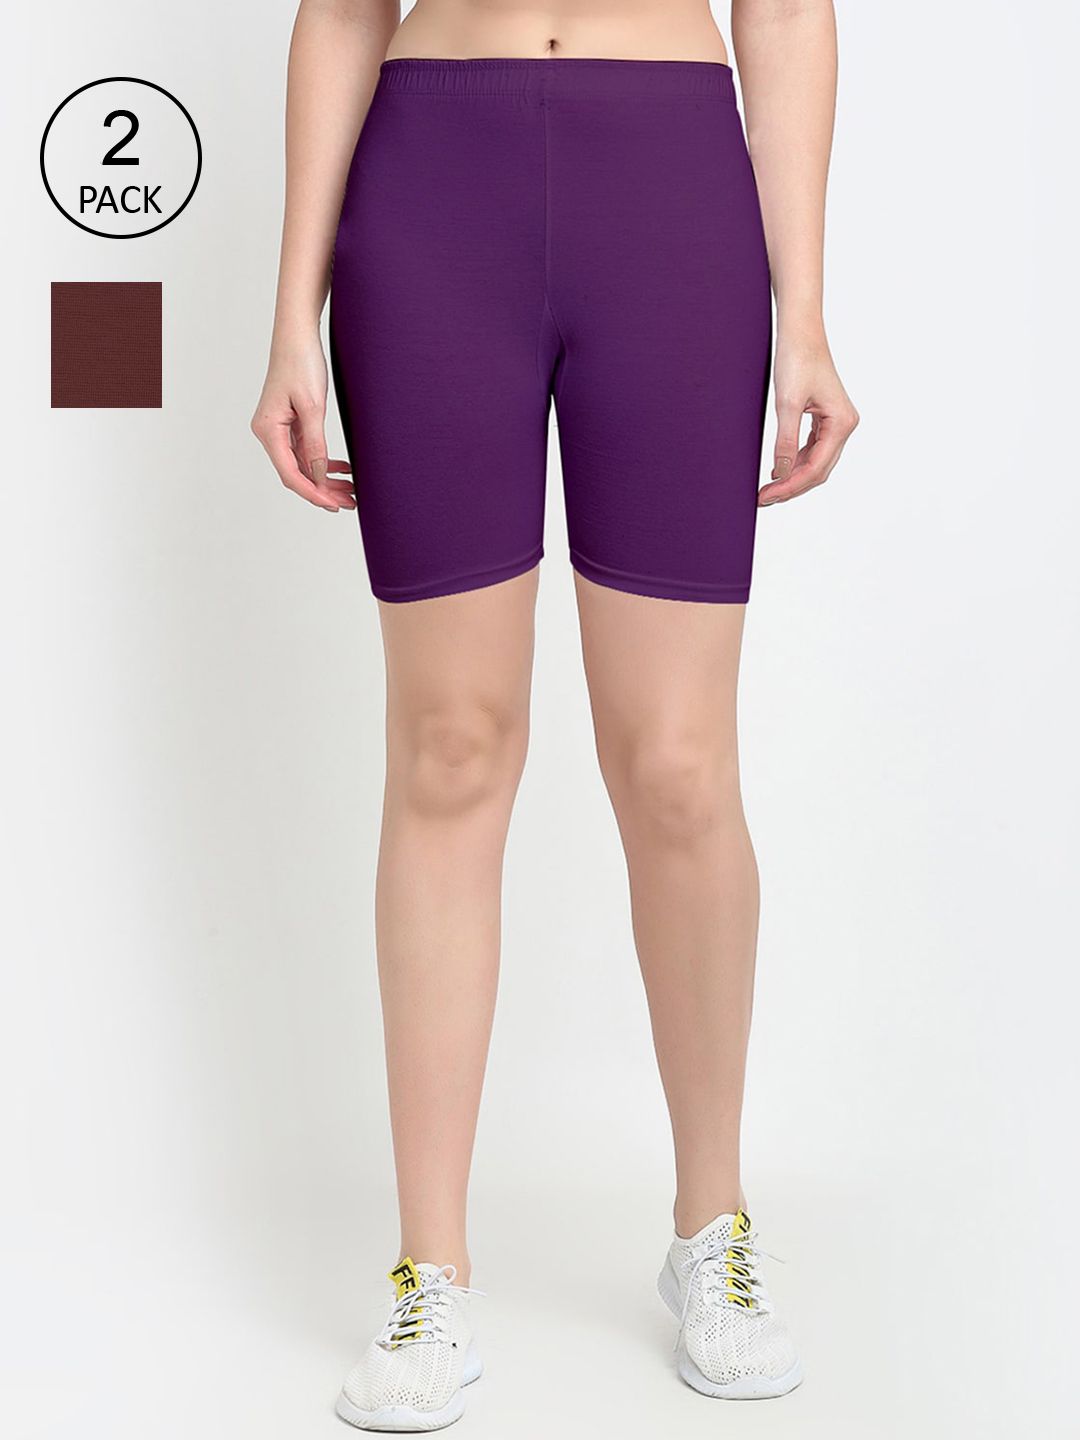 GRACIT Women Pack of 2 Purple & Brown Cycling Shorts Price in India